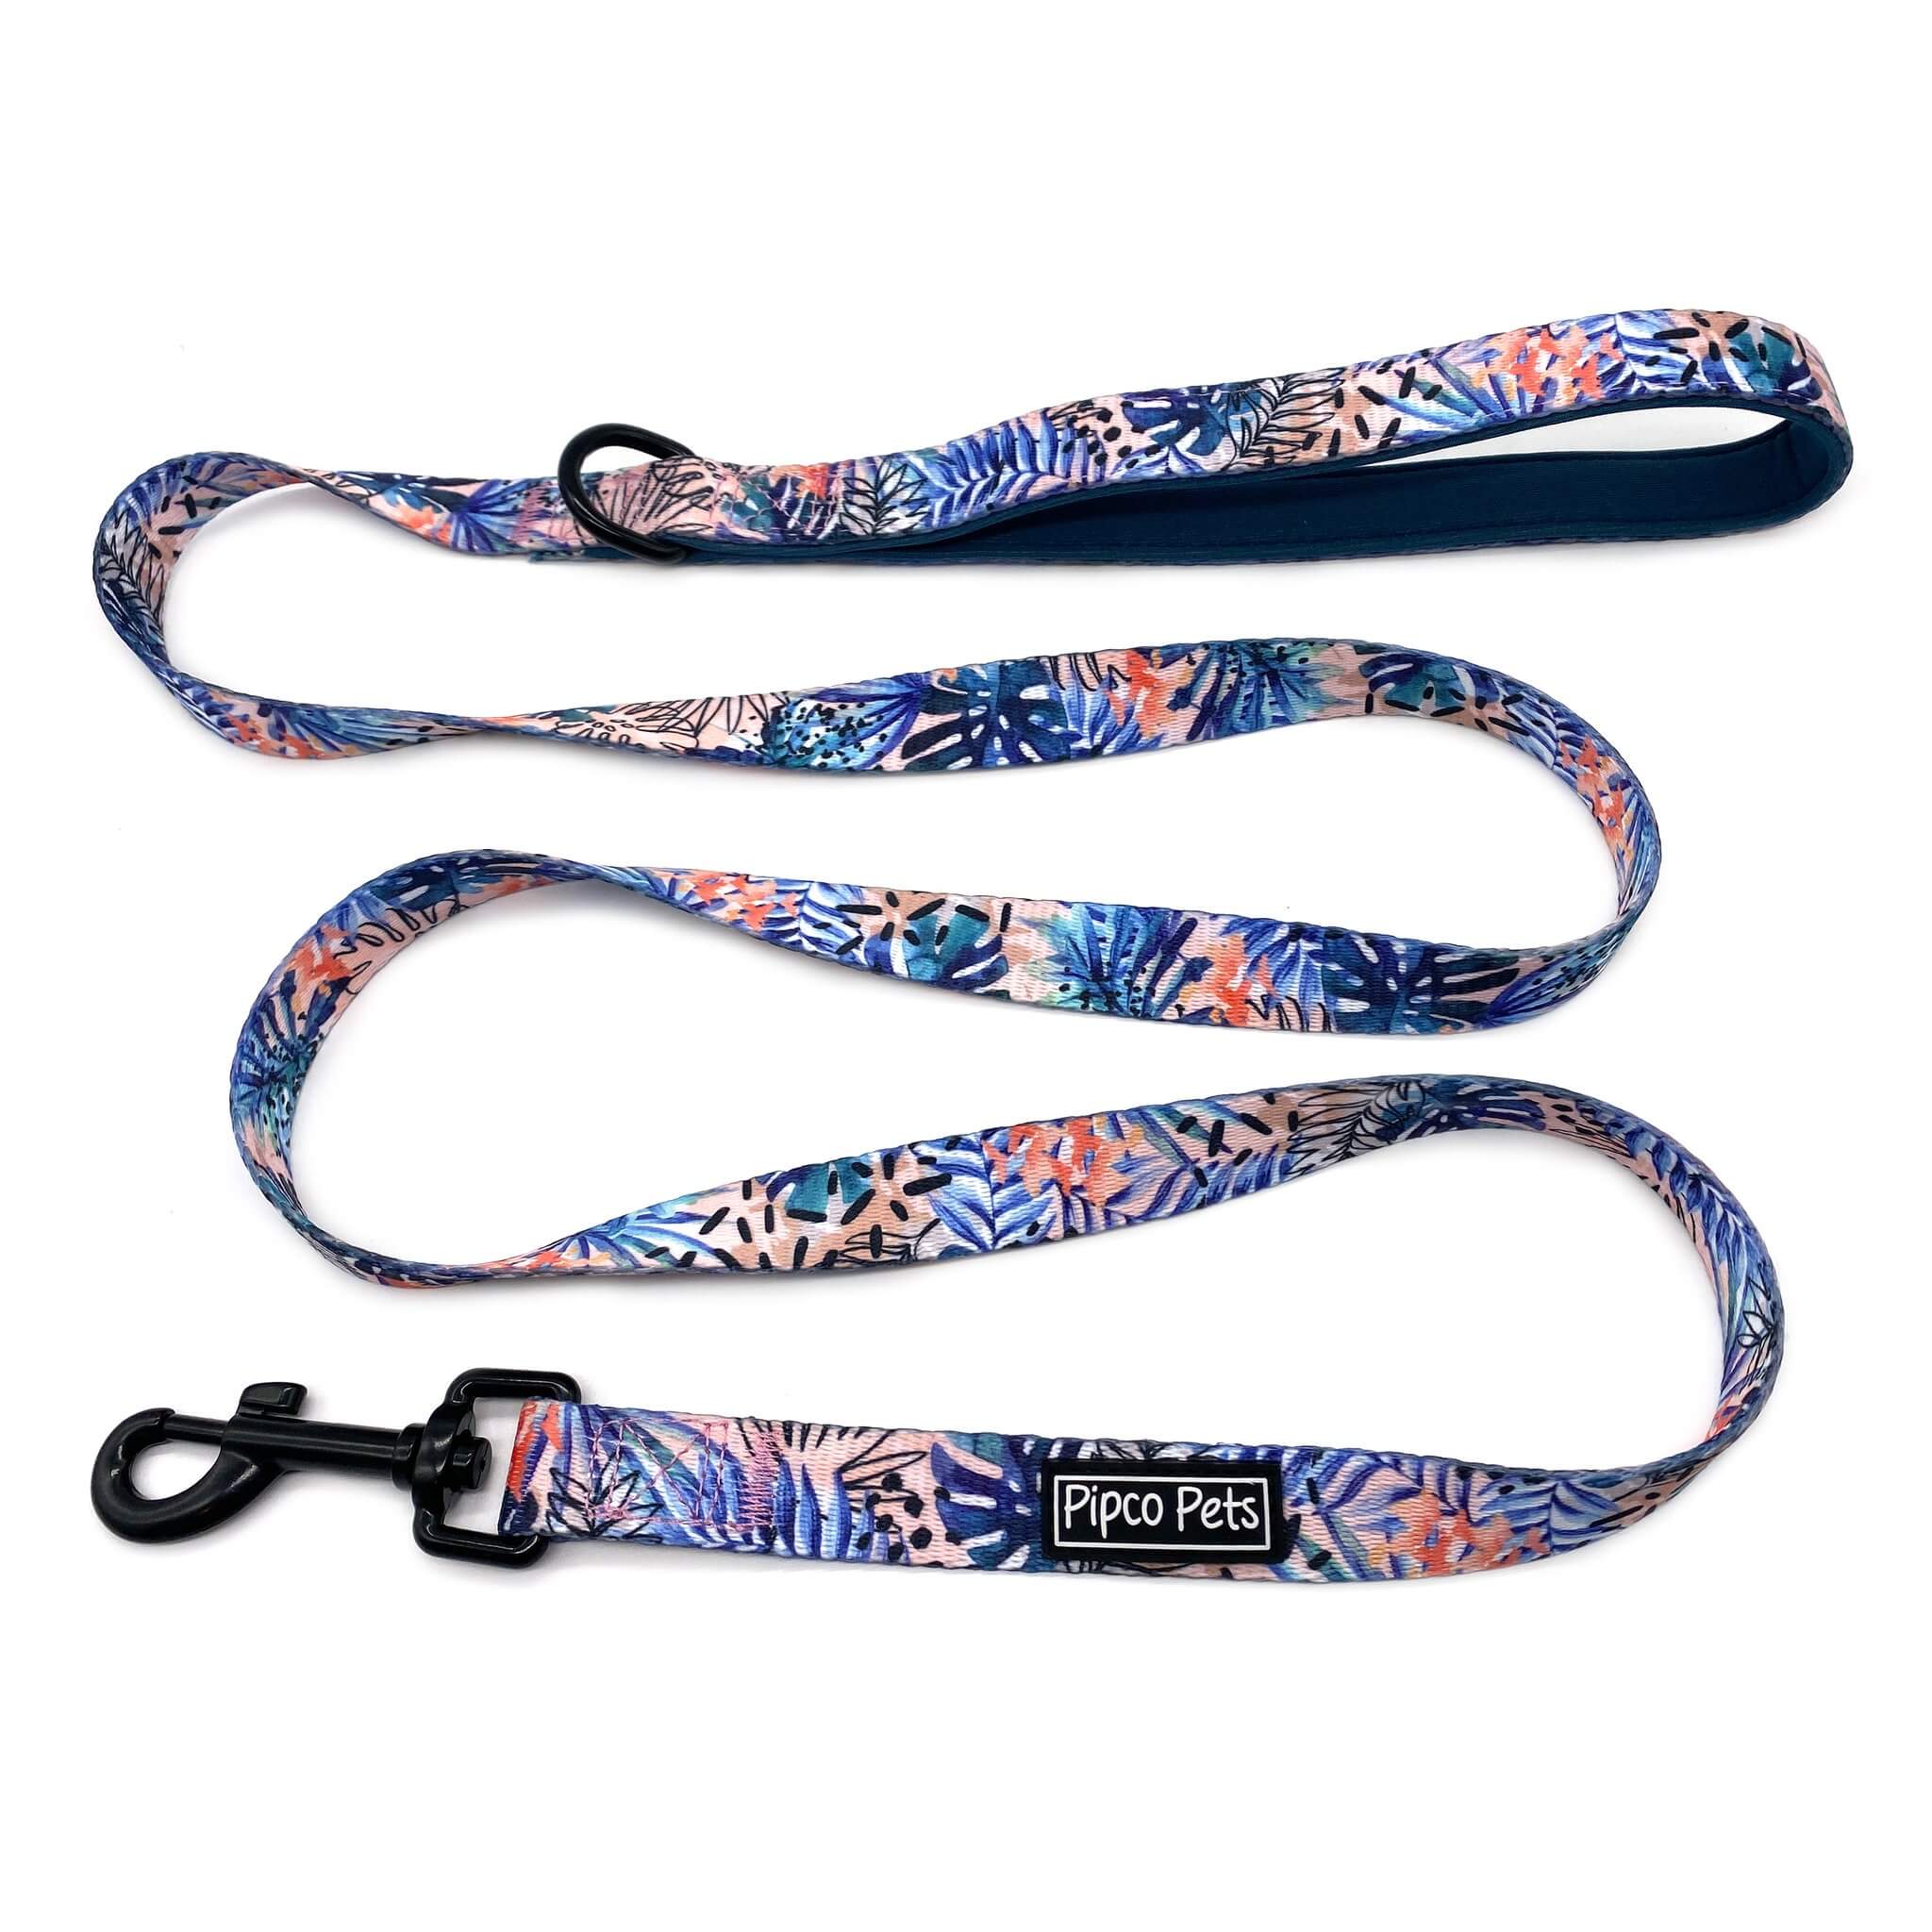 Pipco Pets dog leash  with Tropic Fronds tropical leaves print pattern in blue